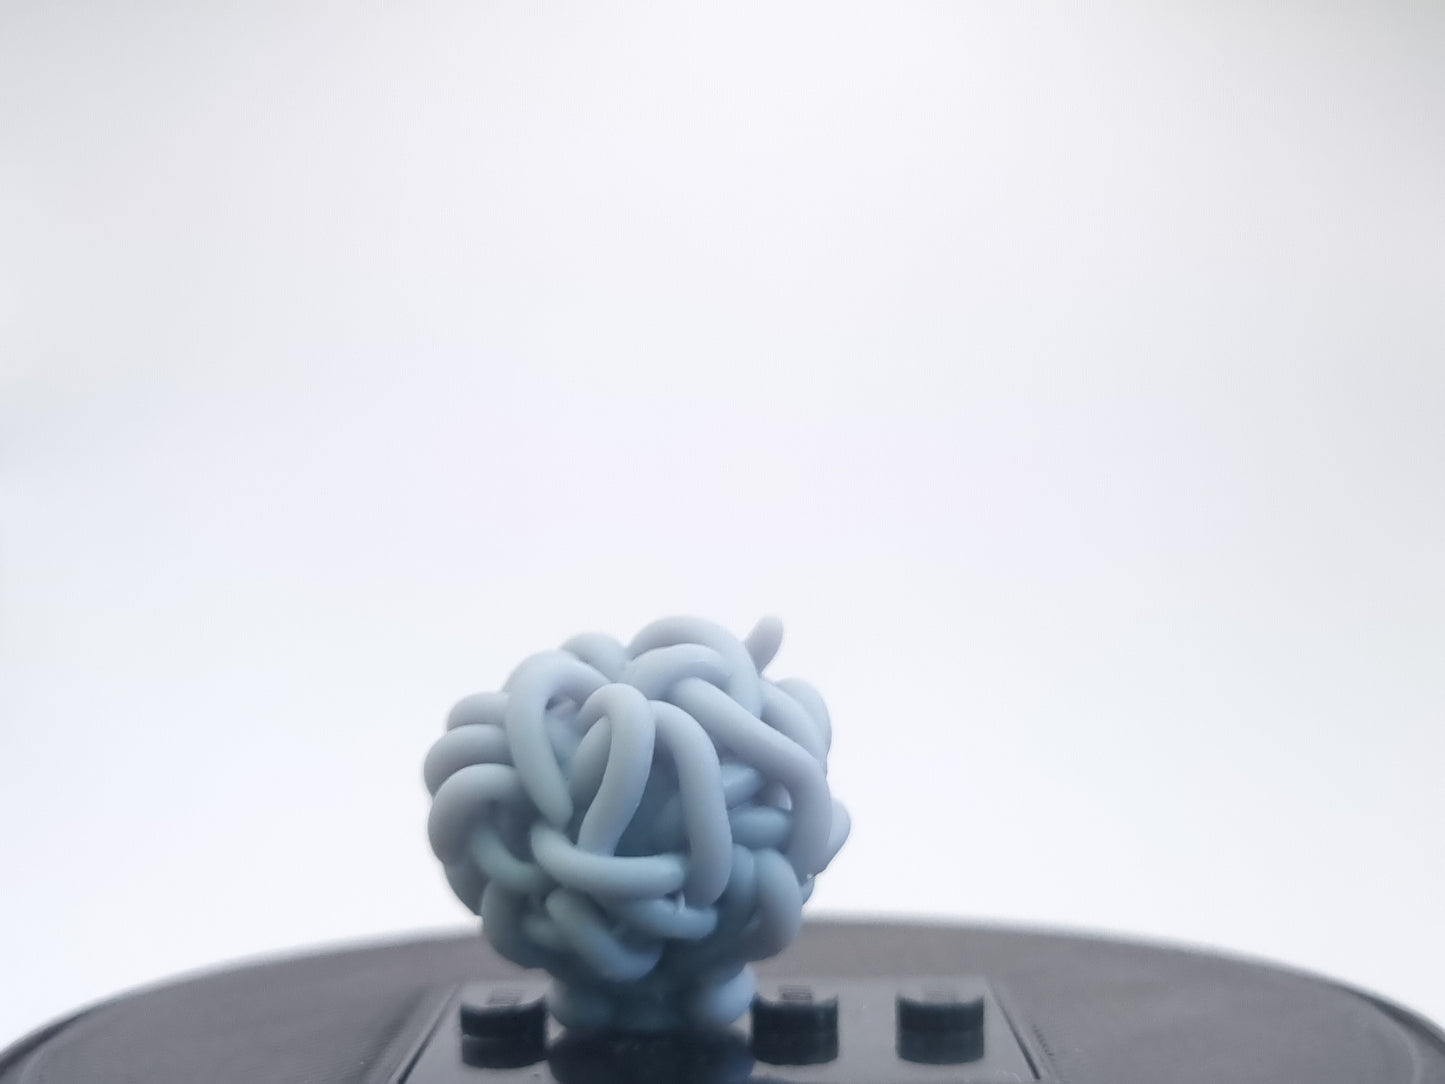 lego compatible 3D printed Curly ball!